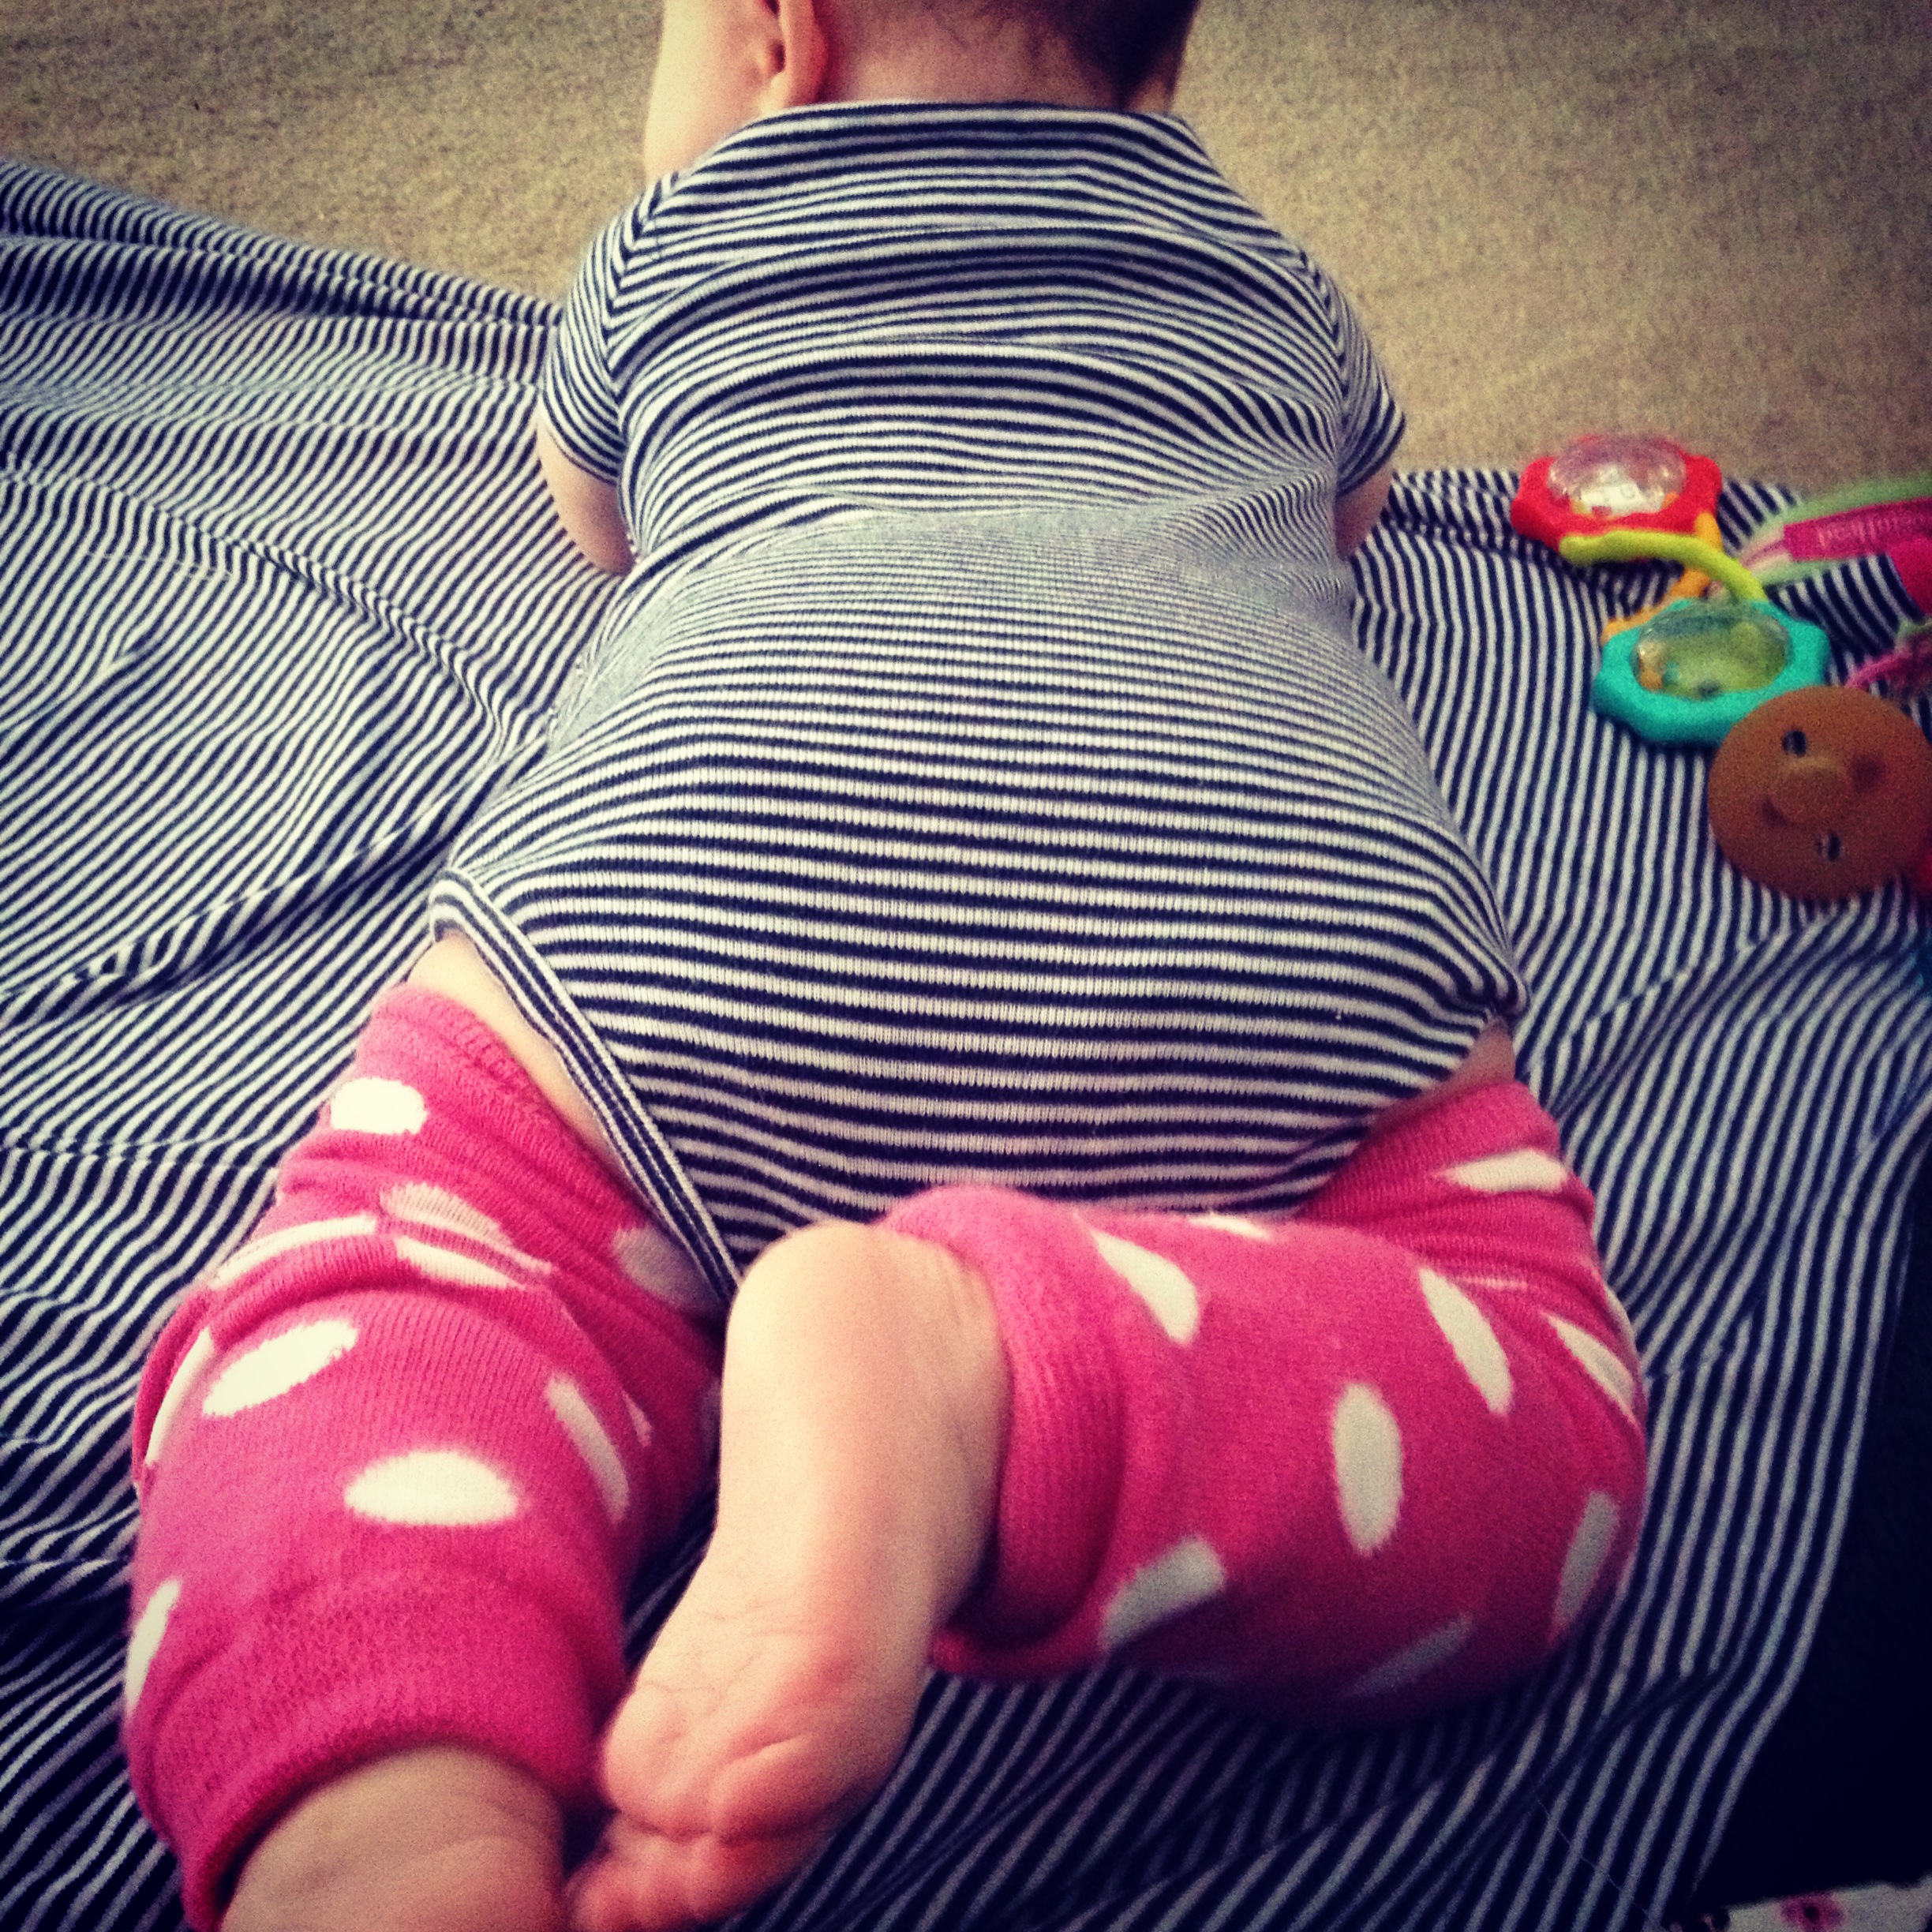 I thought I was prepared for cloth diapering, but the pros and cons of real life application surprised me. Although the positives far out way the negatives. #clothdiapers #clothdiapering #bumgenuis #prosandcons